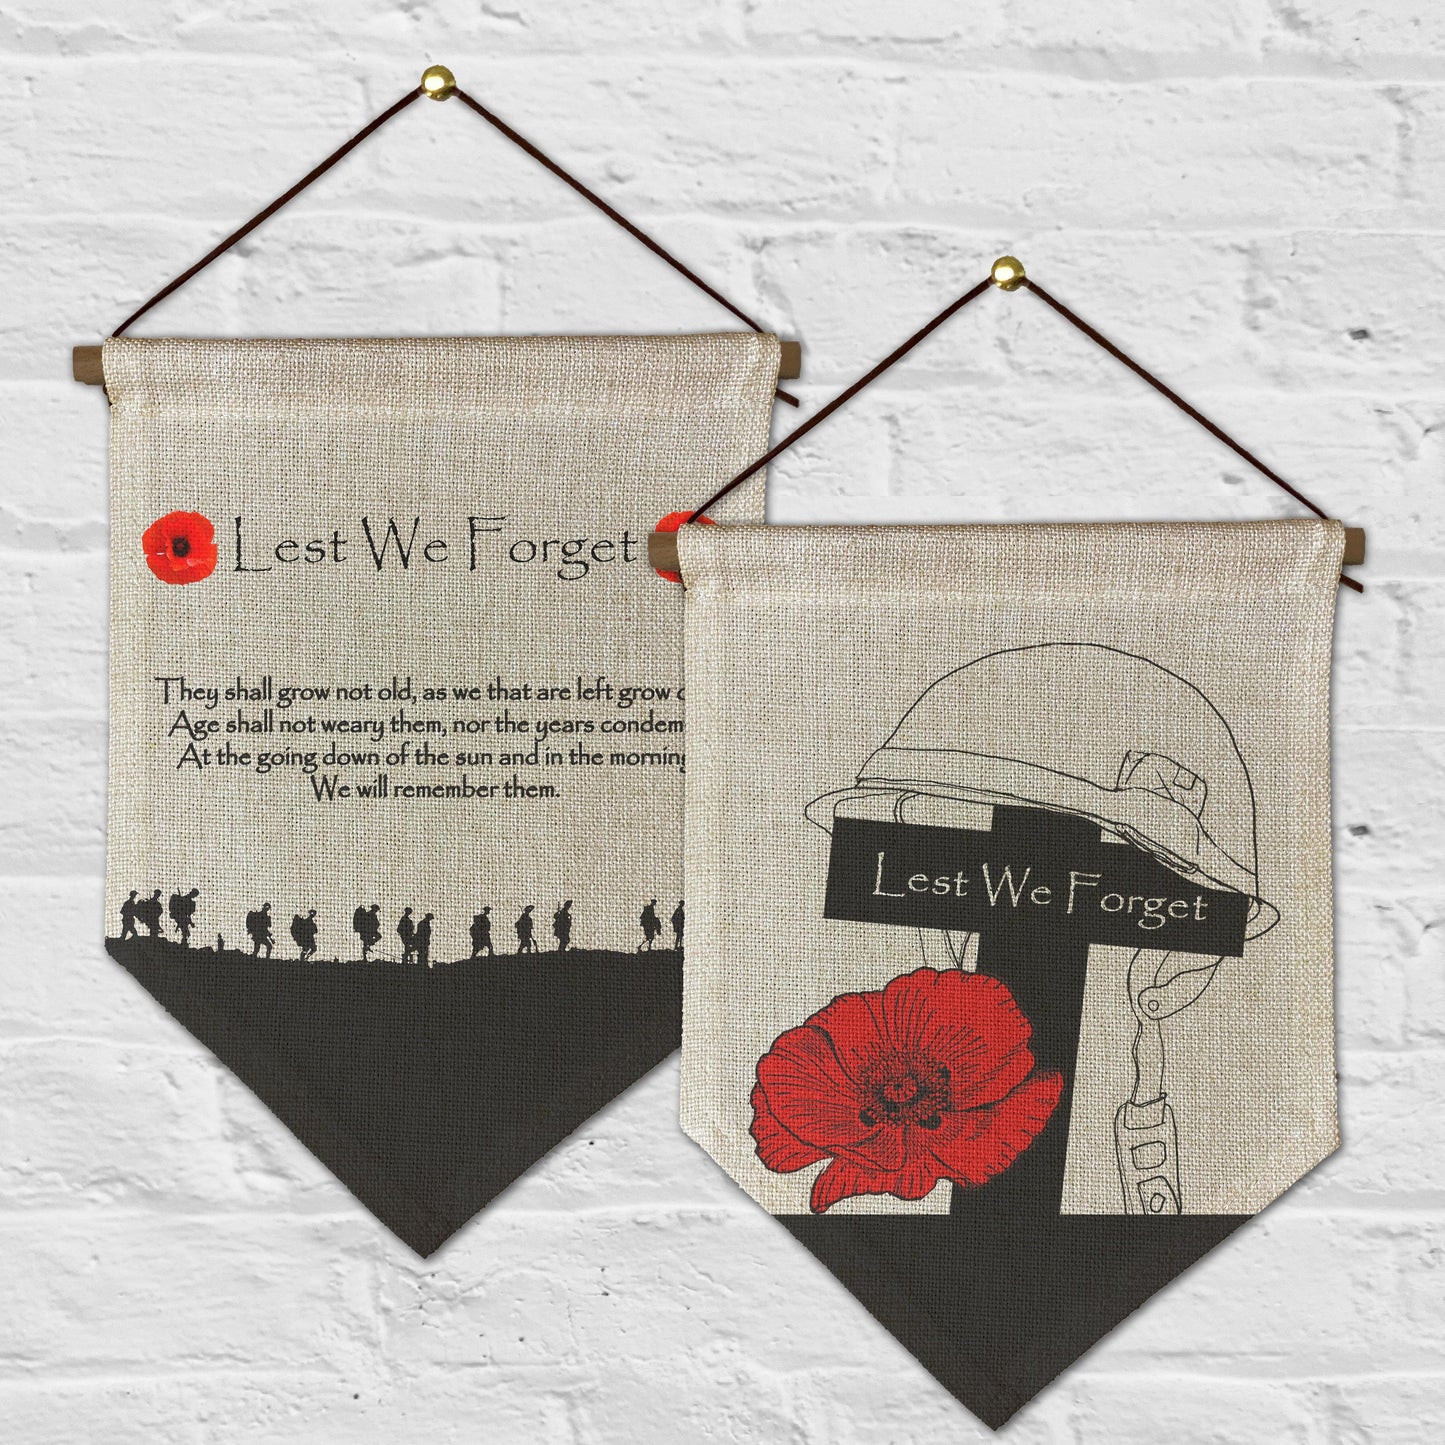 Lest We Forget Bunting/Pennant